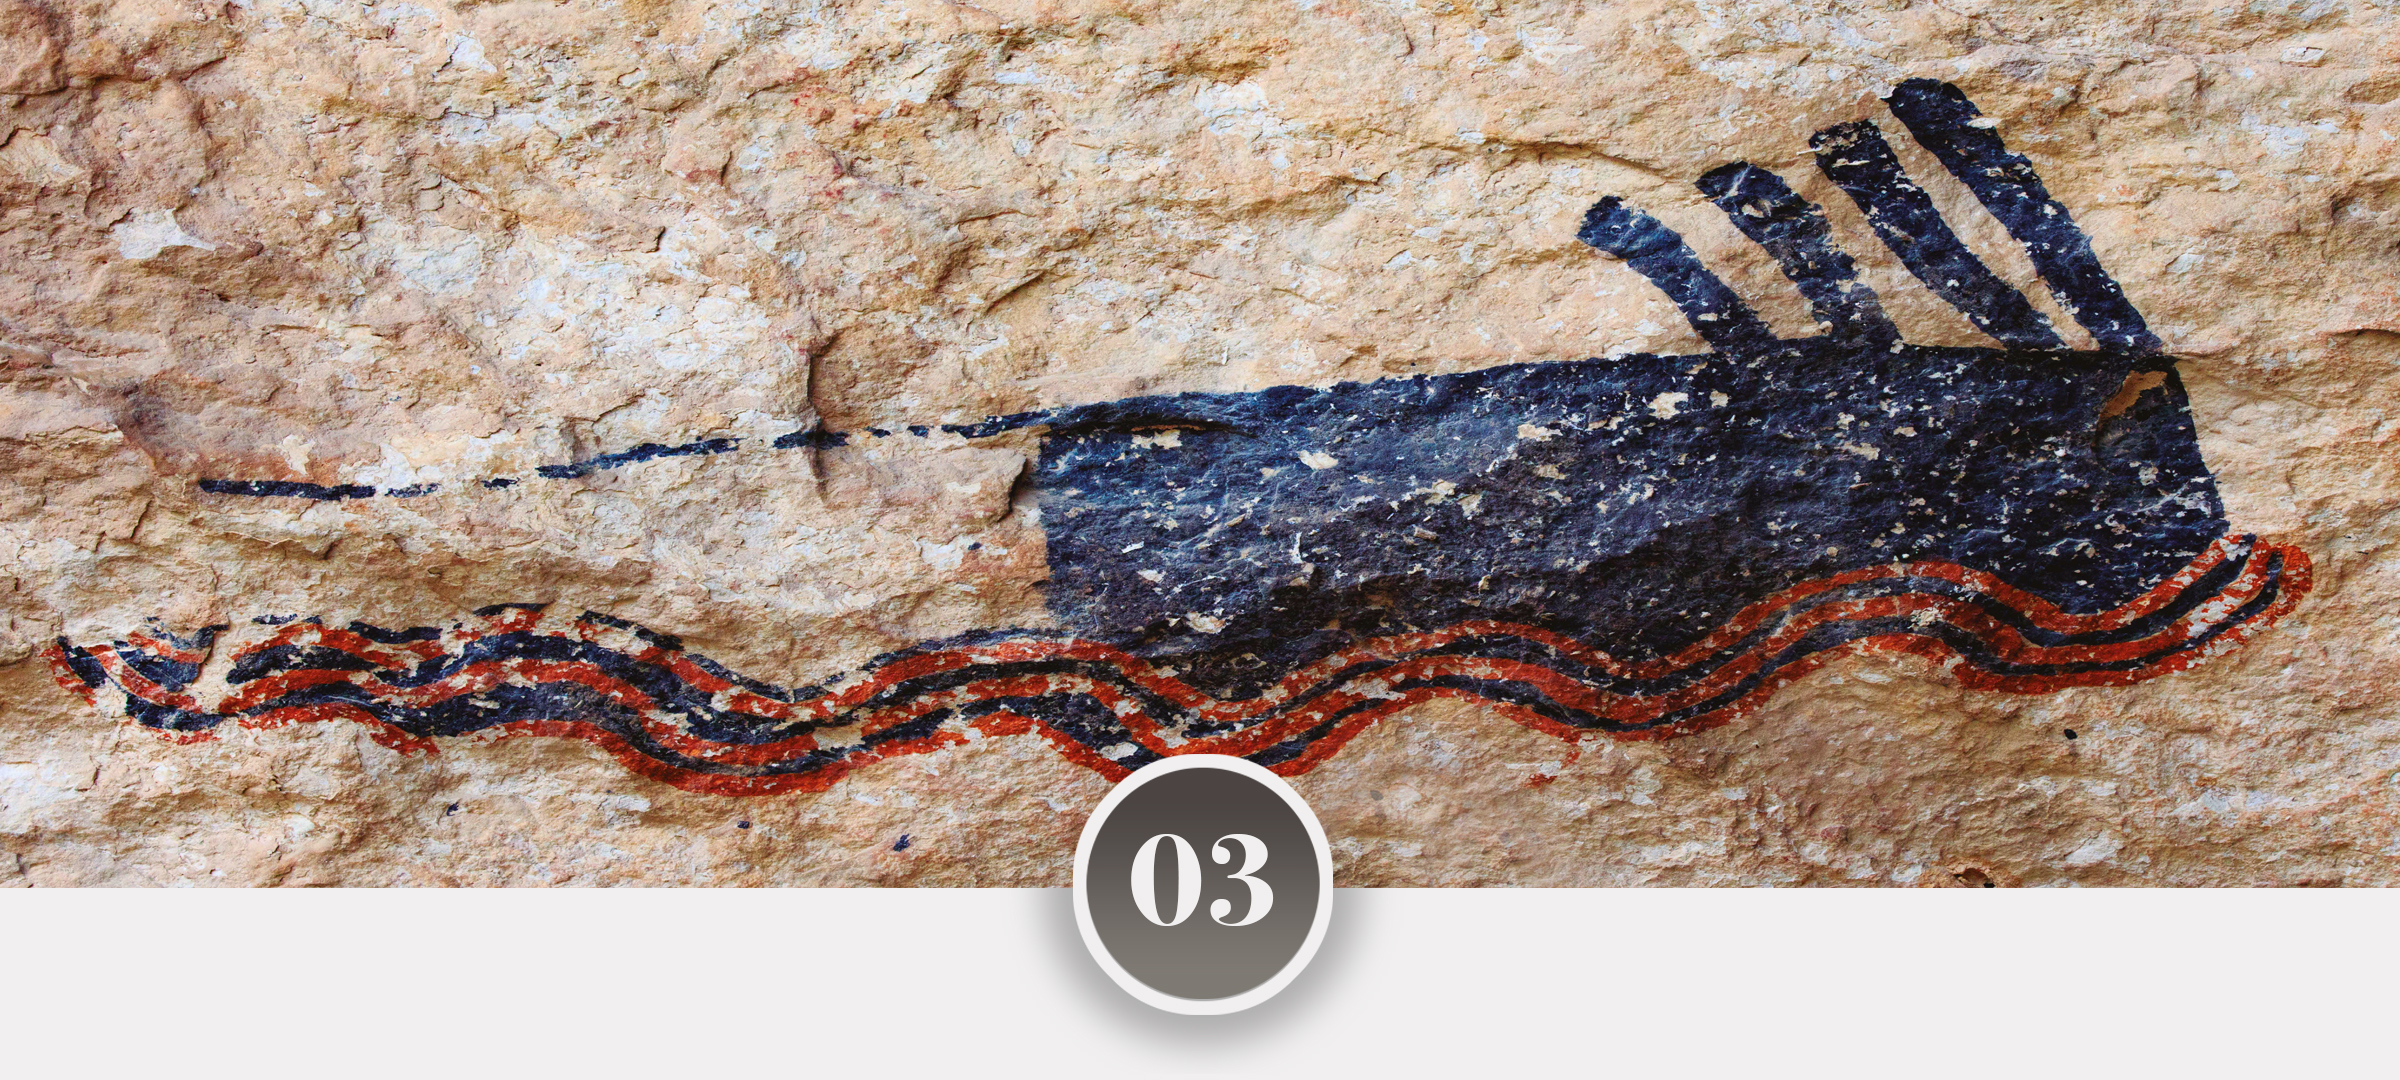 Color Engenders Life Hunter-Gatherer Rock Art in the Lower Pecos Canyonlands